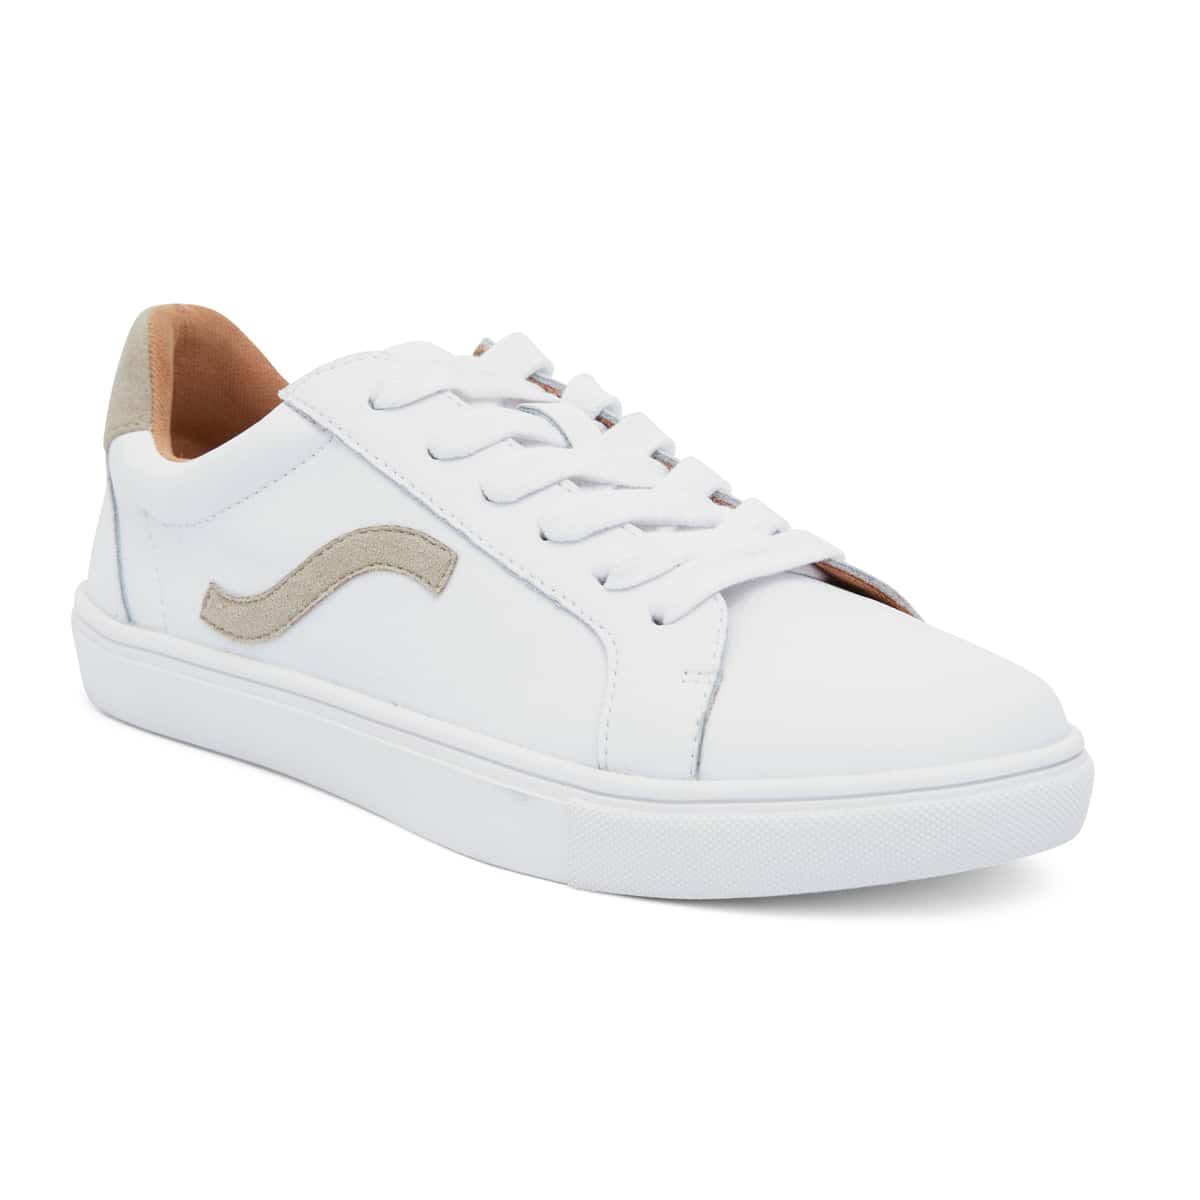 Saxon Sneaker in White And Taupe Leather